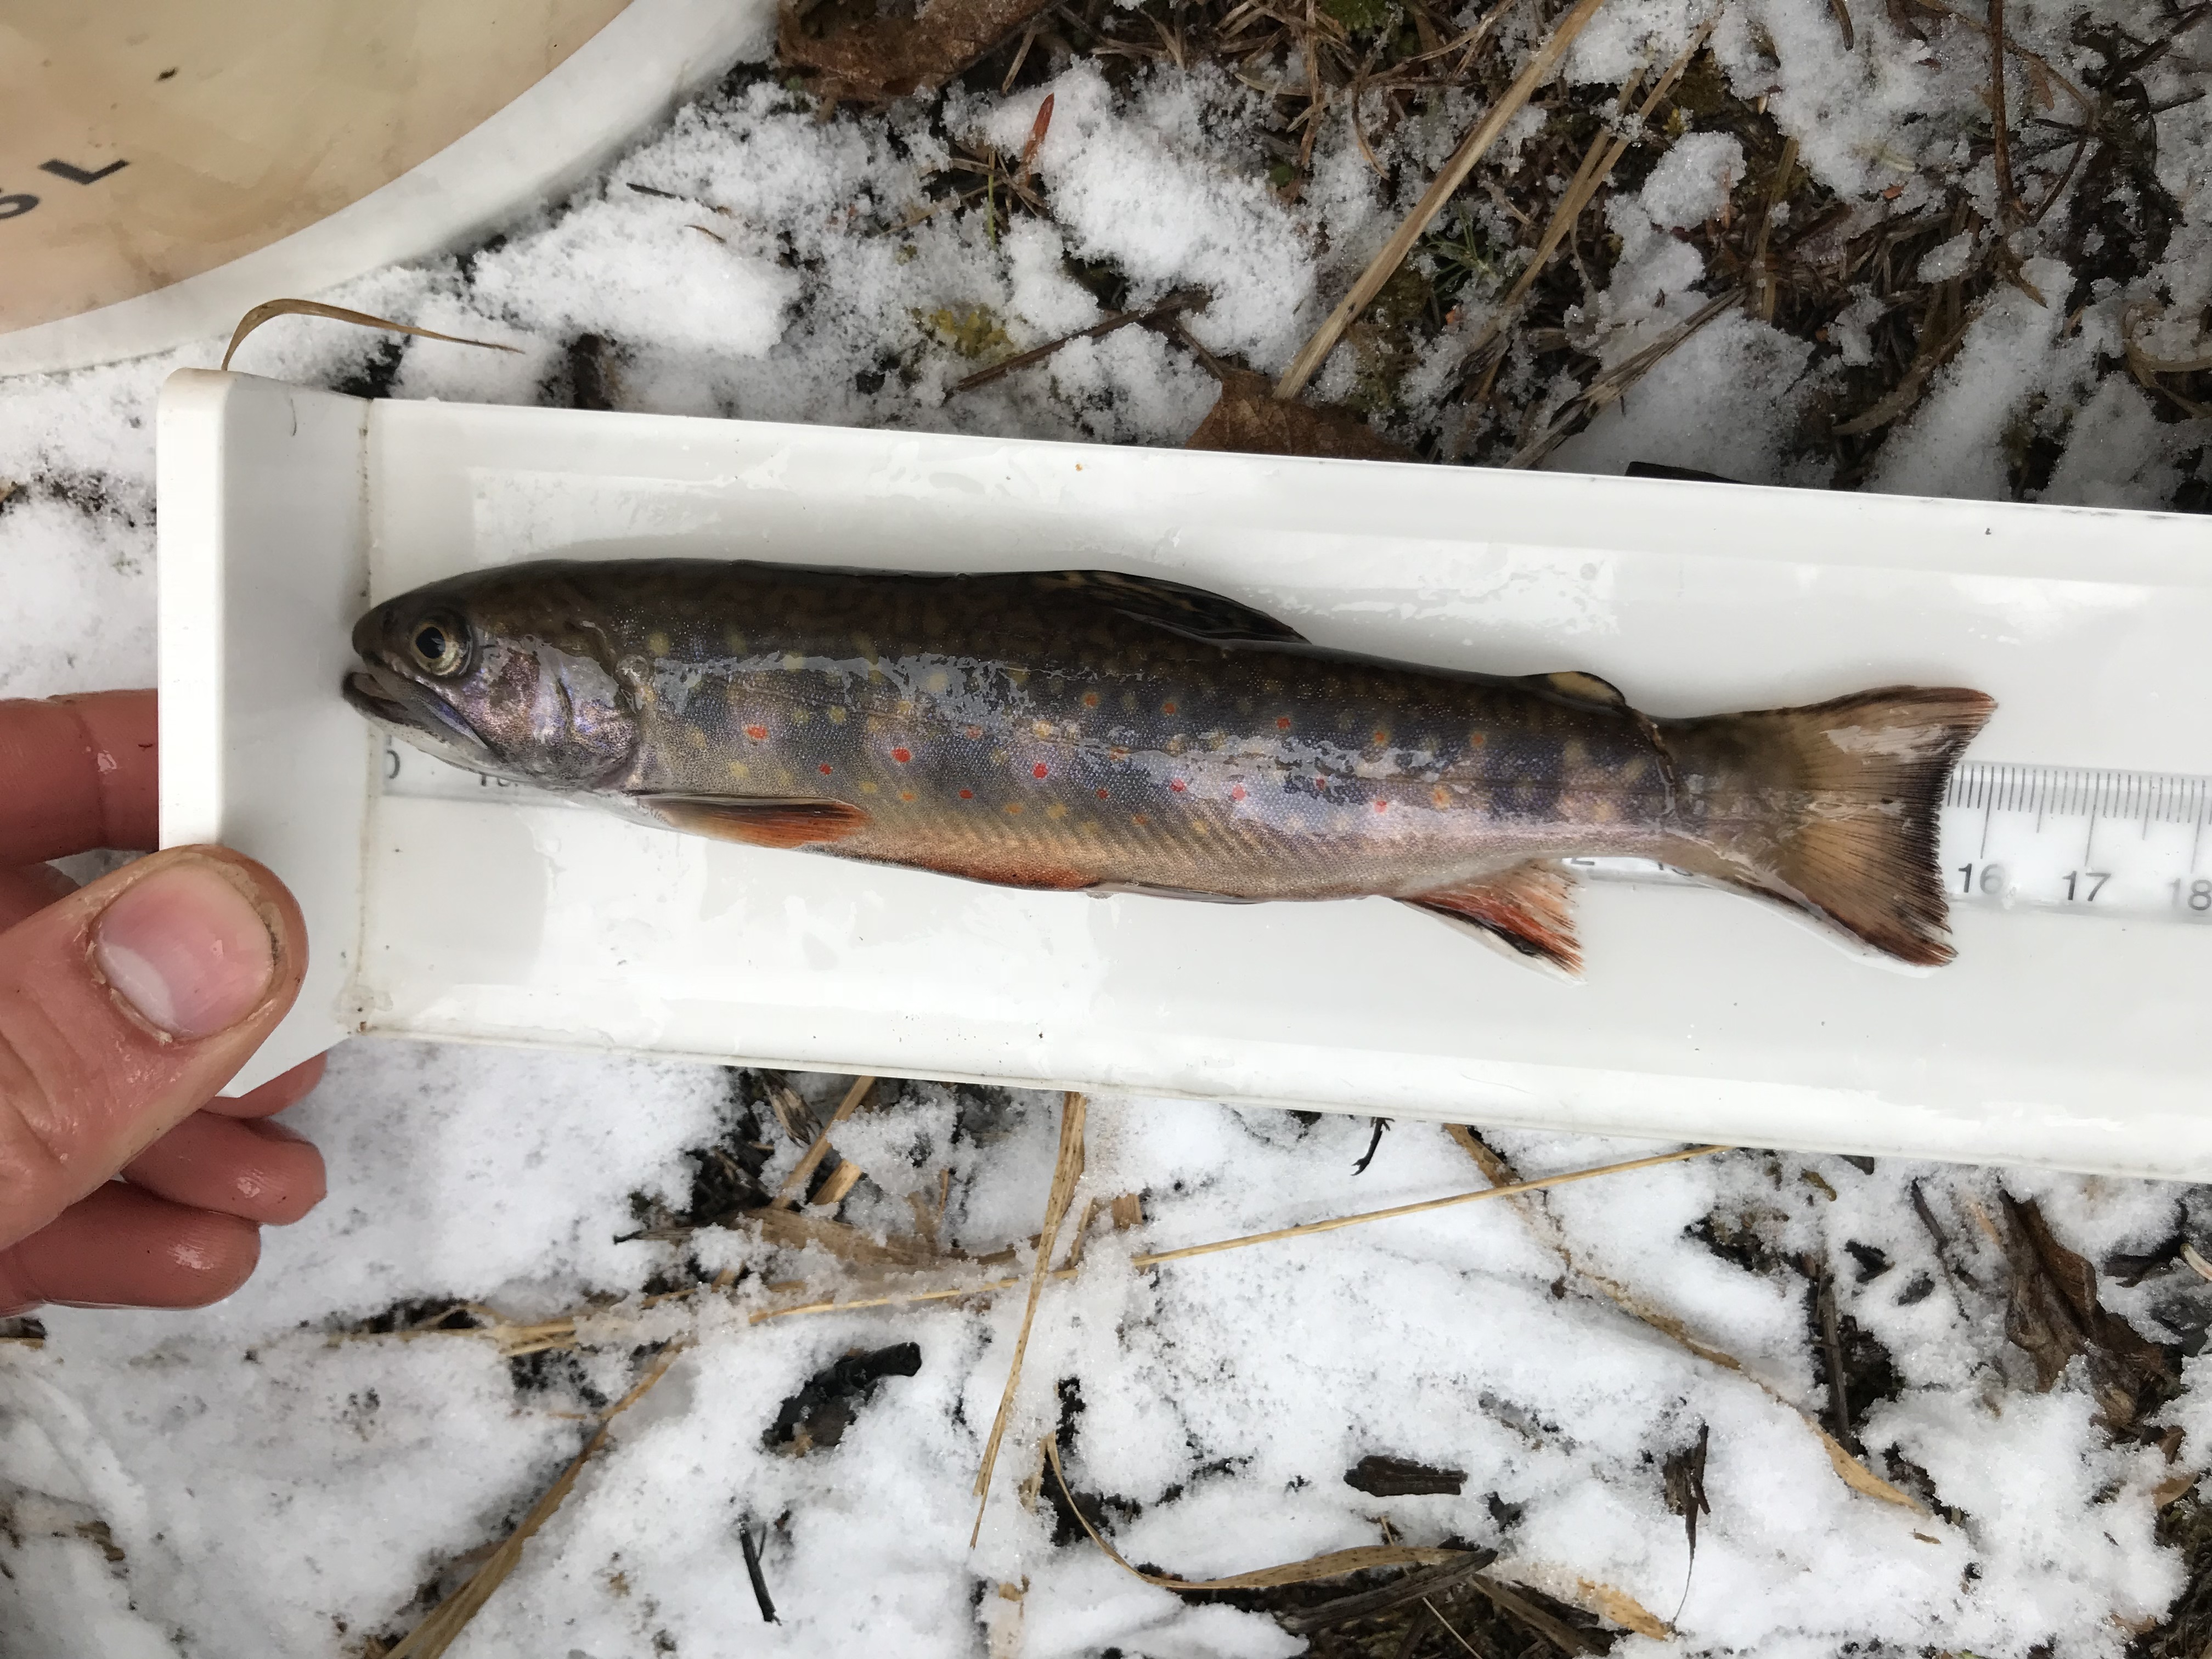 Photo by Susanne Weber. Image of juvenile fish measured on ruler with snow background.